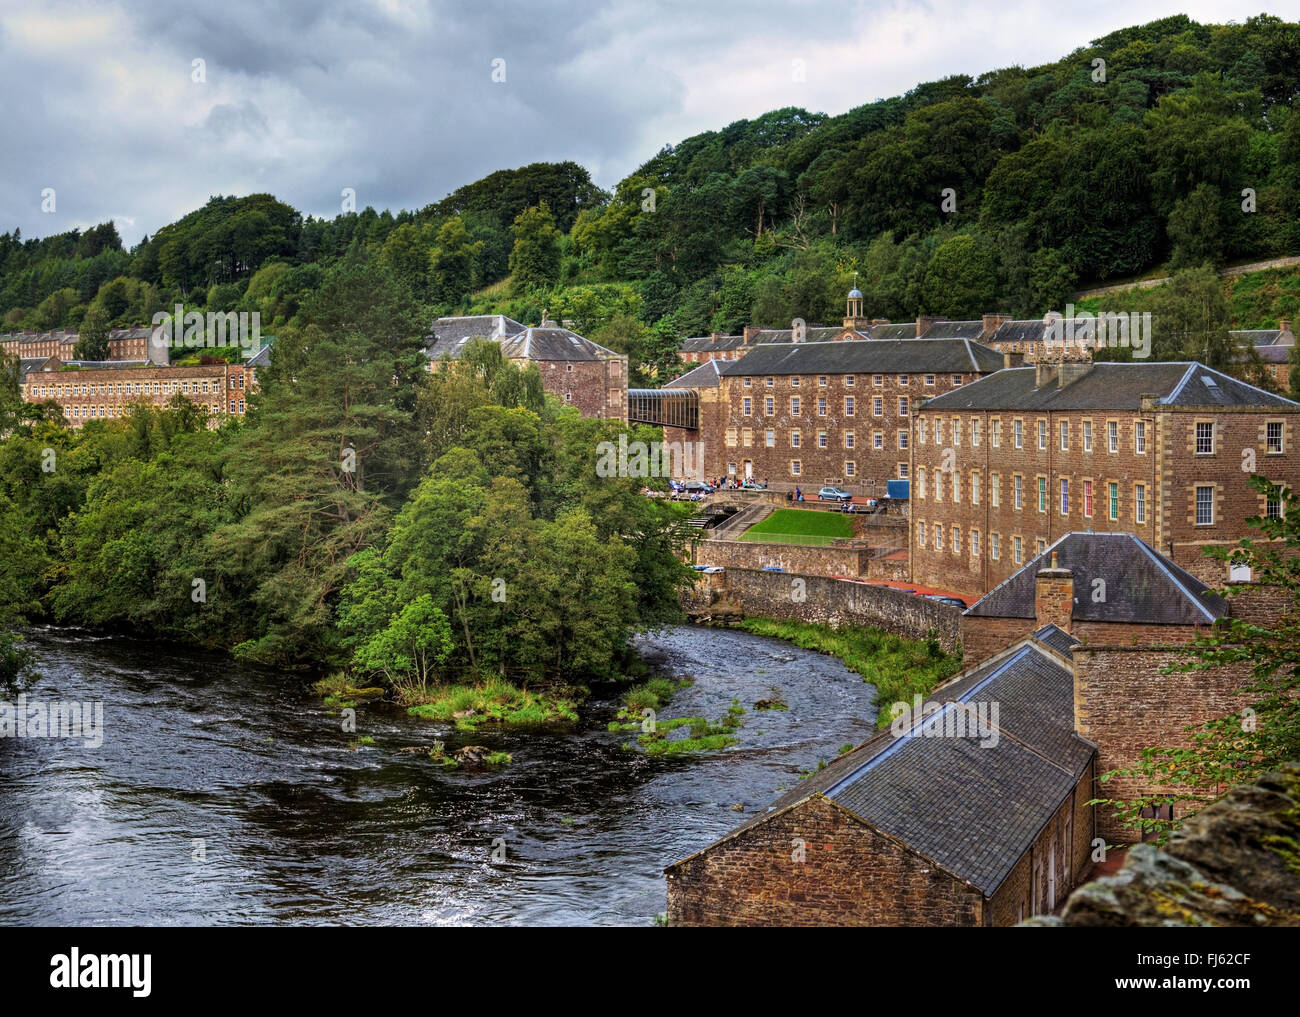 New Lanark Mills by the River Clyde on a cloudy day Stock Photo